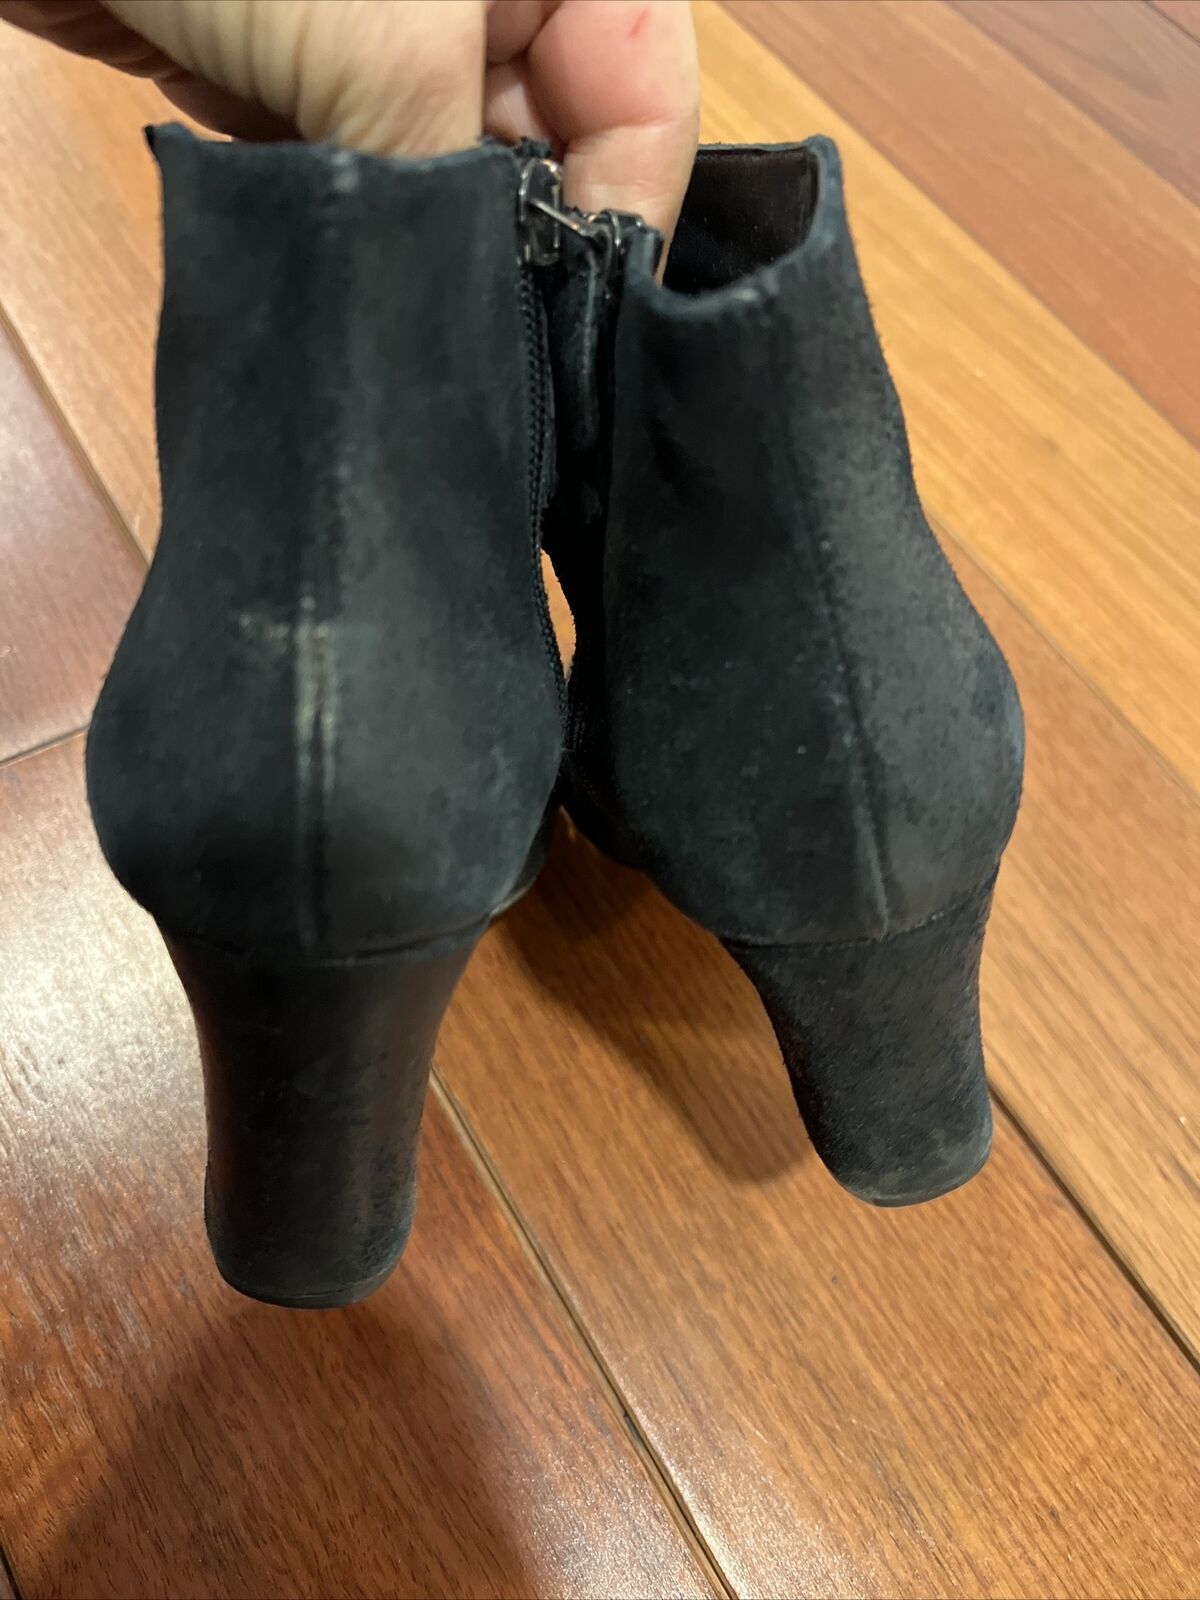 Chanel Black Leather Booties Size 36.5 - image 6